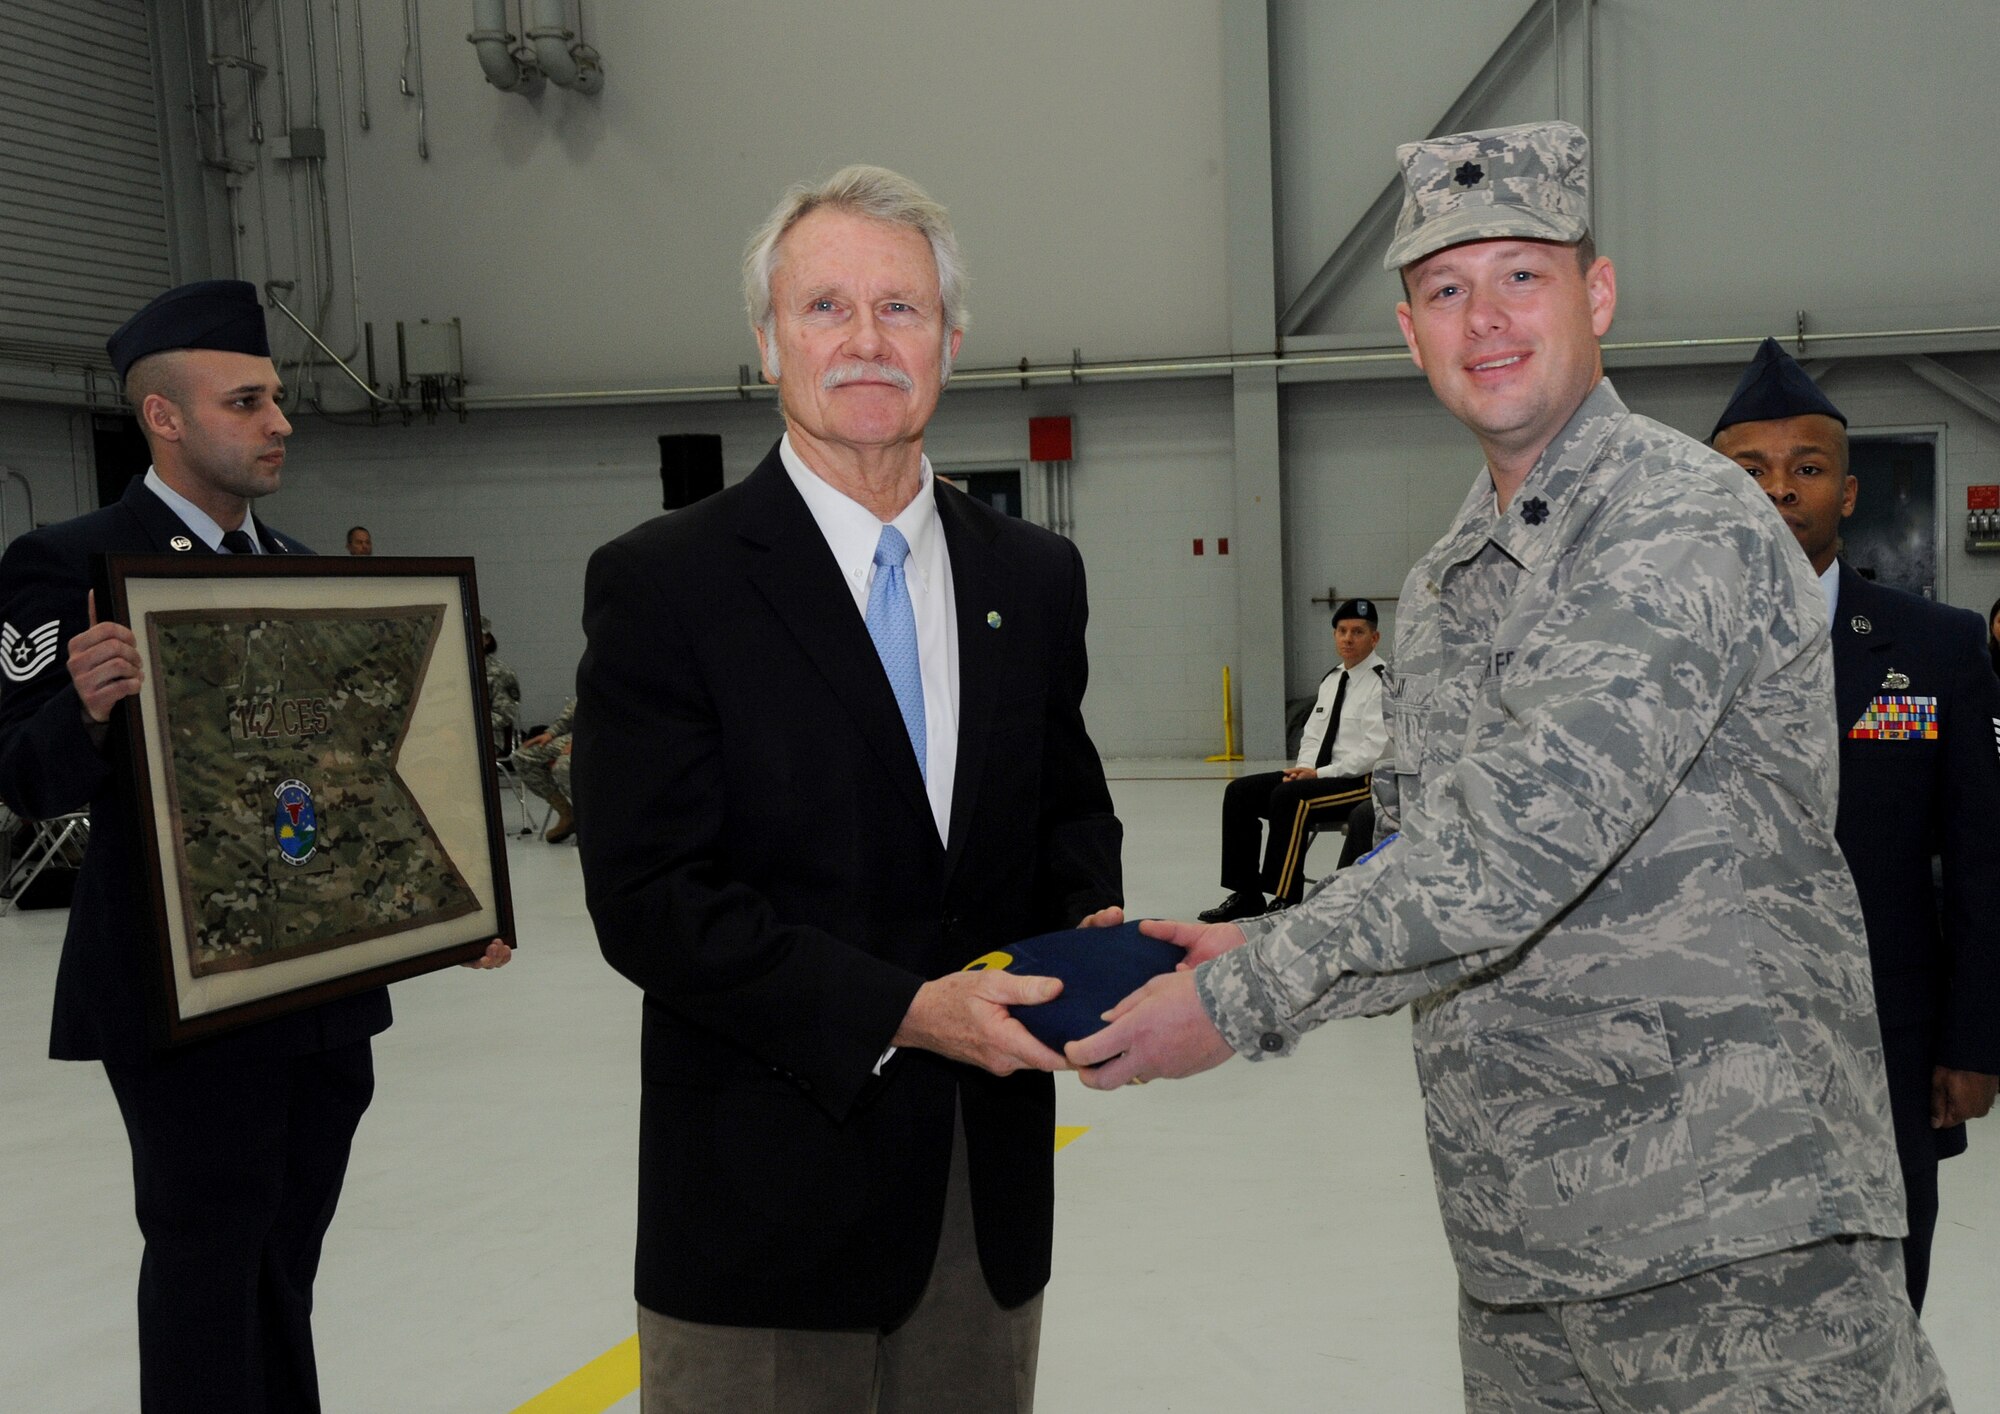 Oregon Governor John Kitzhaber receives the Oregon flag that was flown during deployment from Lt. Col. Jason Lay, 142nd Fighter Wing Civil Engineer Squadron Commander, during the formal Demobilization Ceremony at the Portland Air National Guard Base, Ore., Dec. 7, 2014. The Airmen recently returned from overseas deployment assignments to support Operation Enduring Freedom. (U.S. Air National Guard photo by Tech. Sgt. John Hughel, 142nd Fighter Wing Public Affairs/Released)